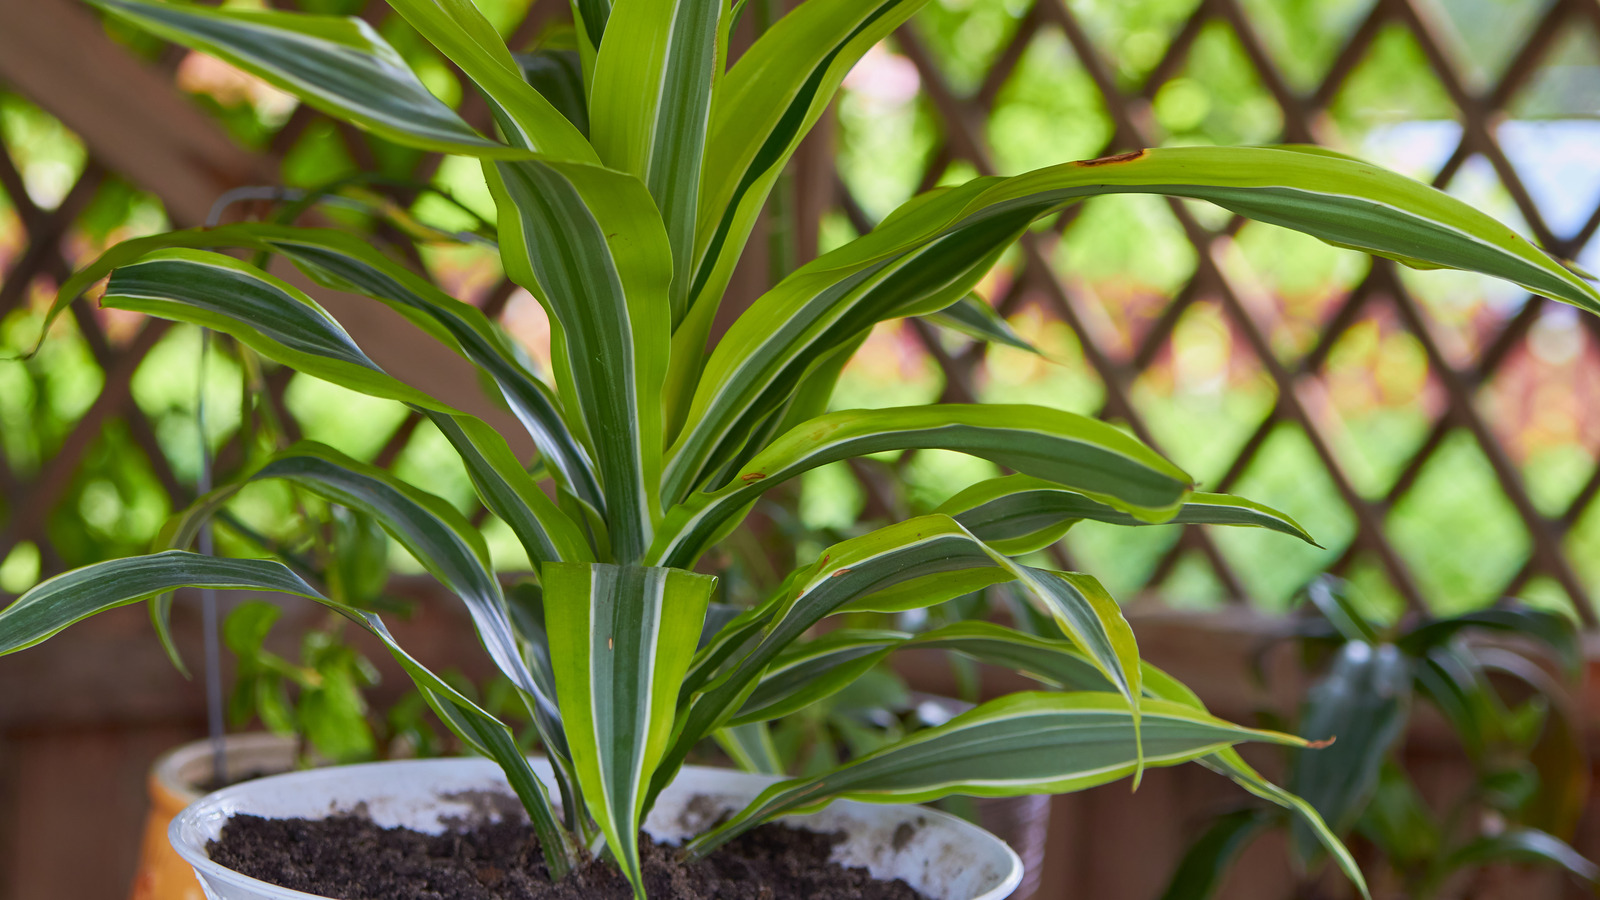 How To Care For A Mass Cane Plant